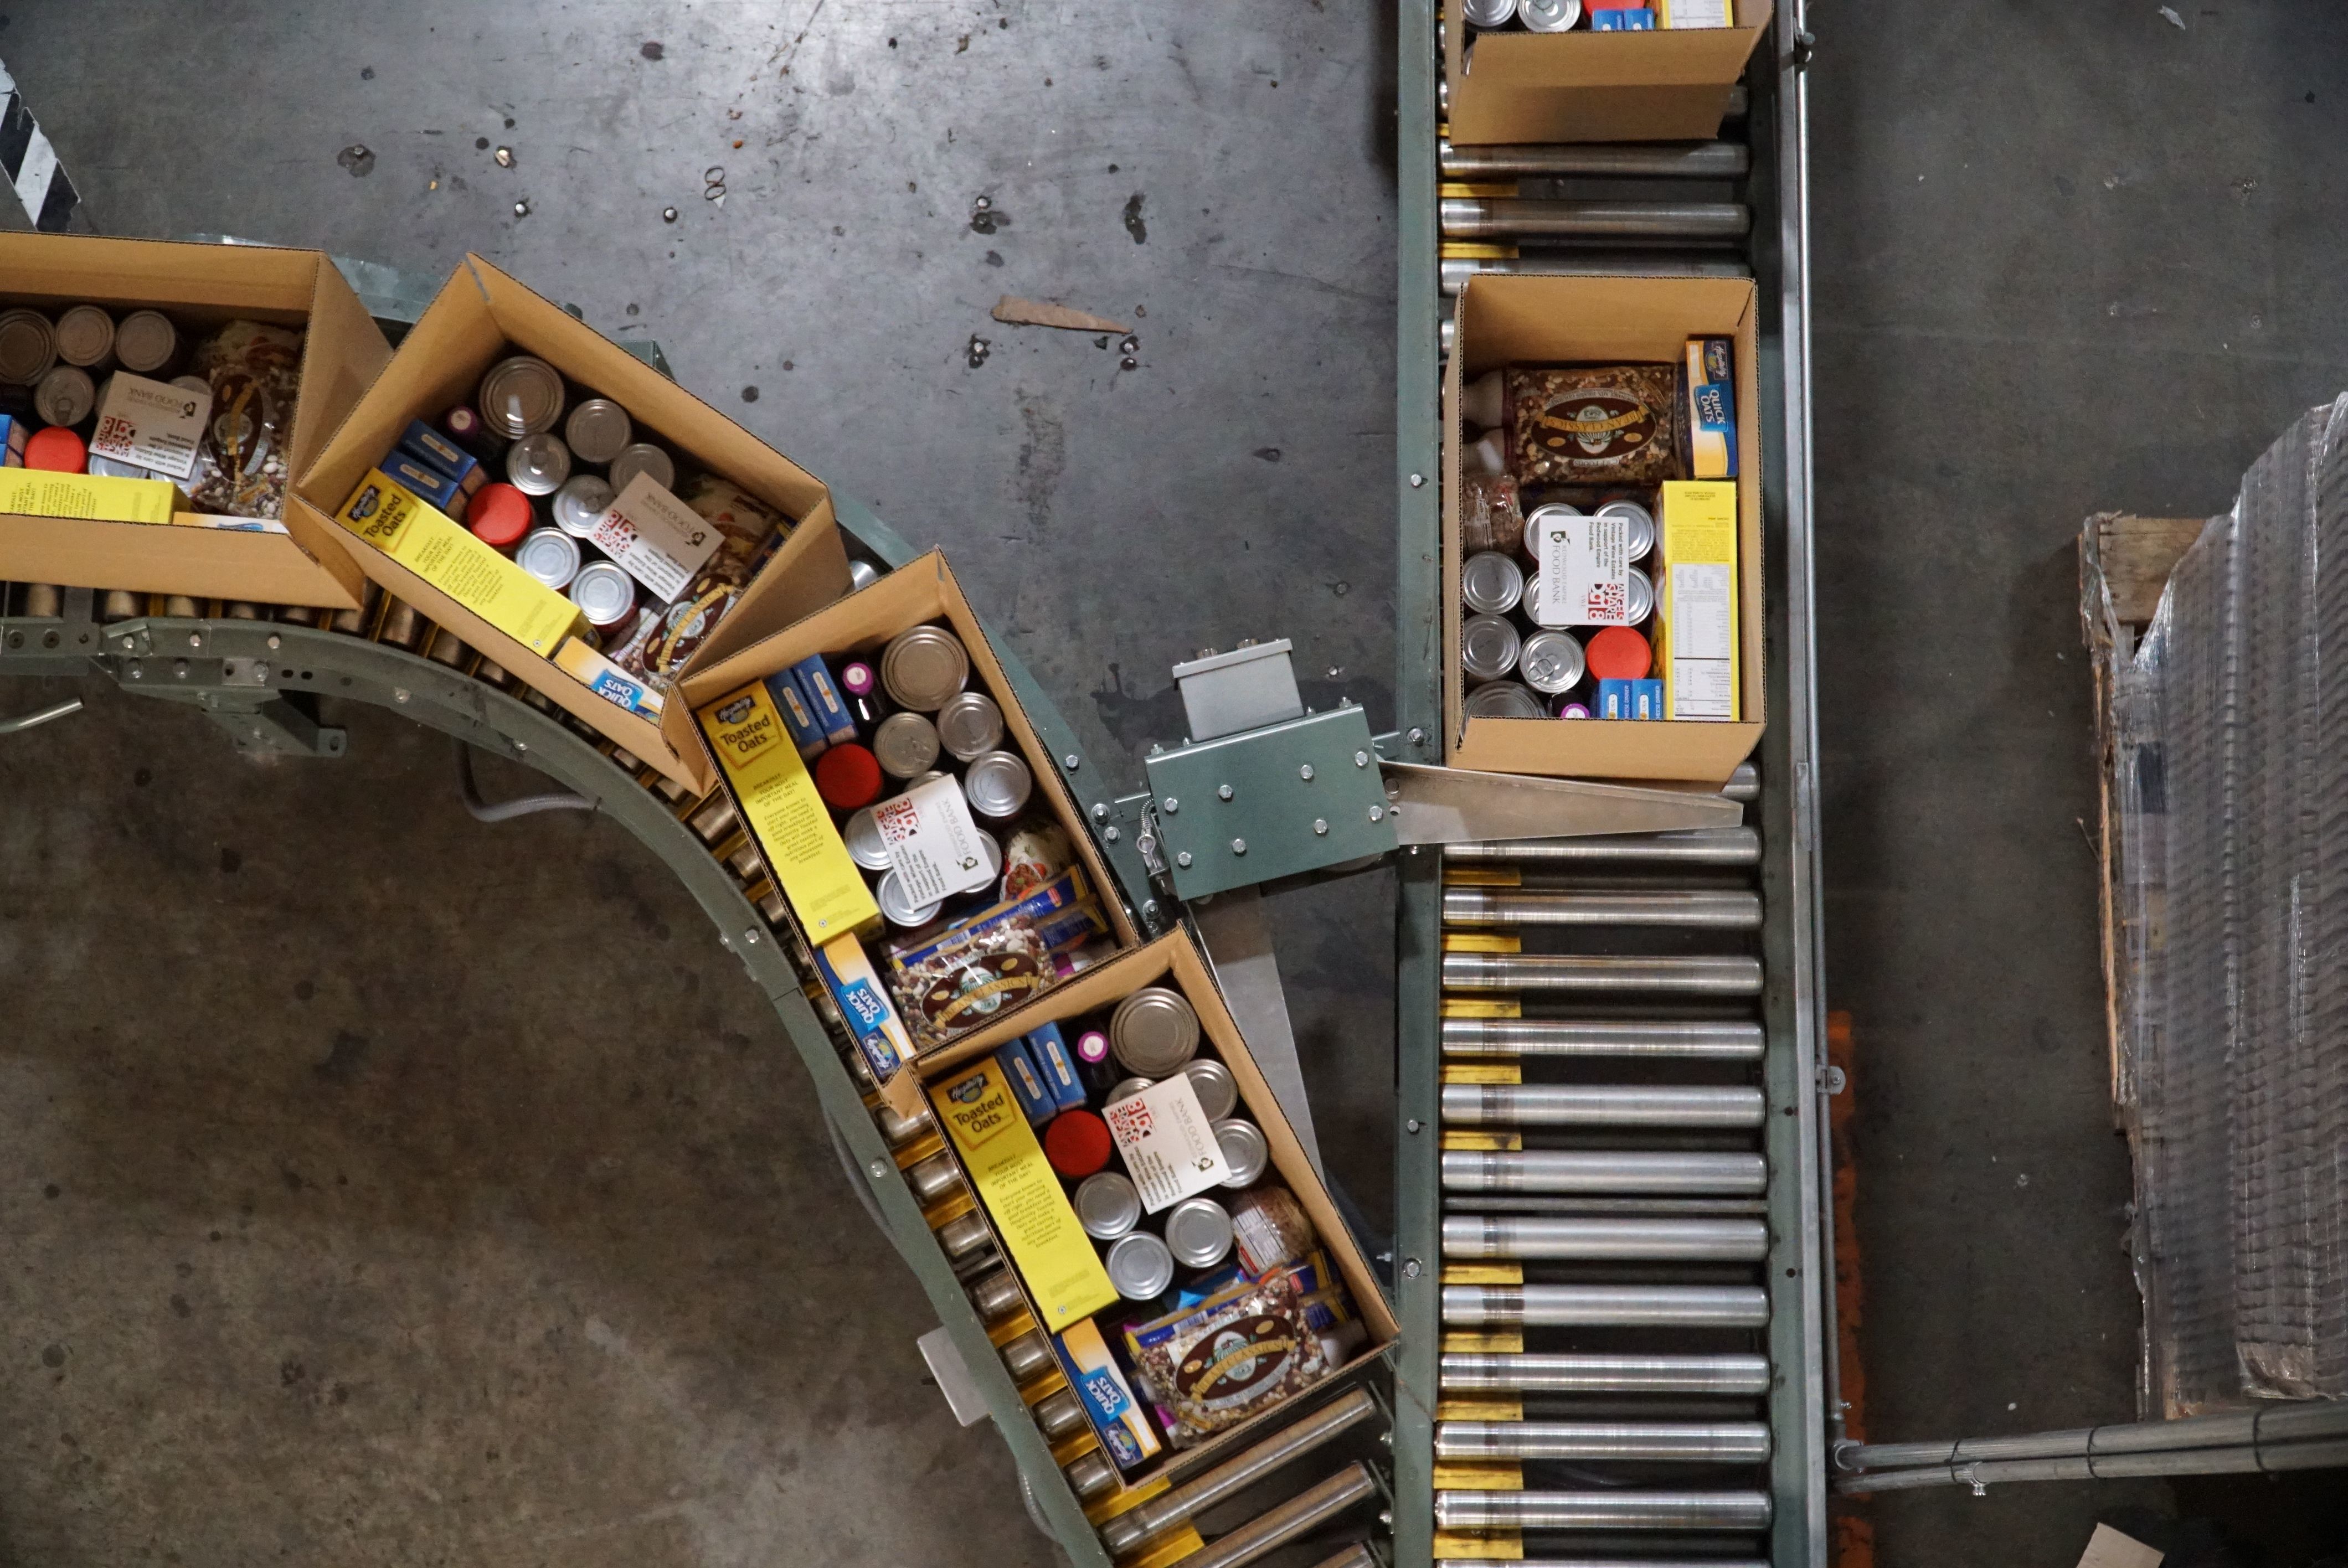 Overhead image of boxes being packed with food on a conveyor belt